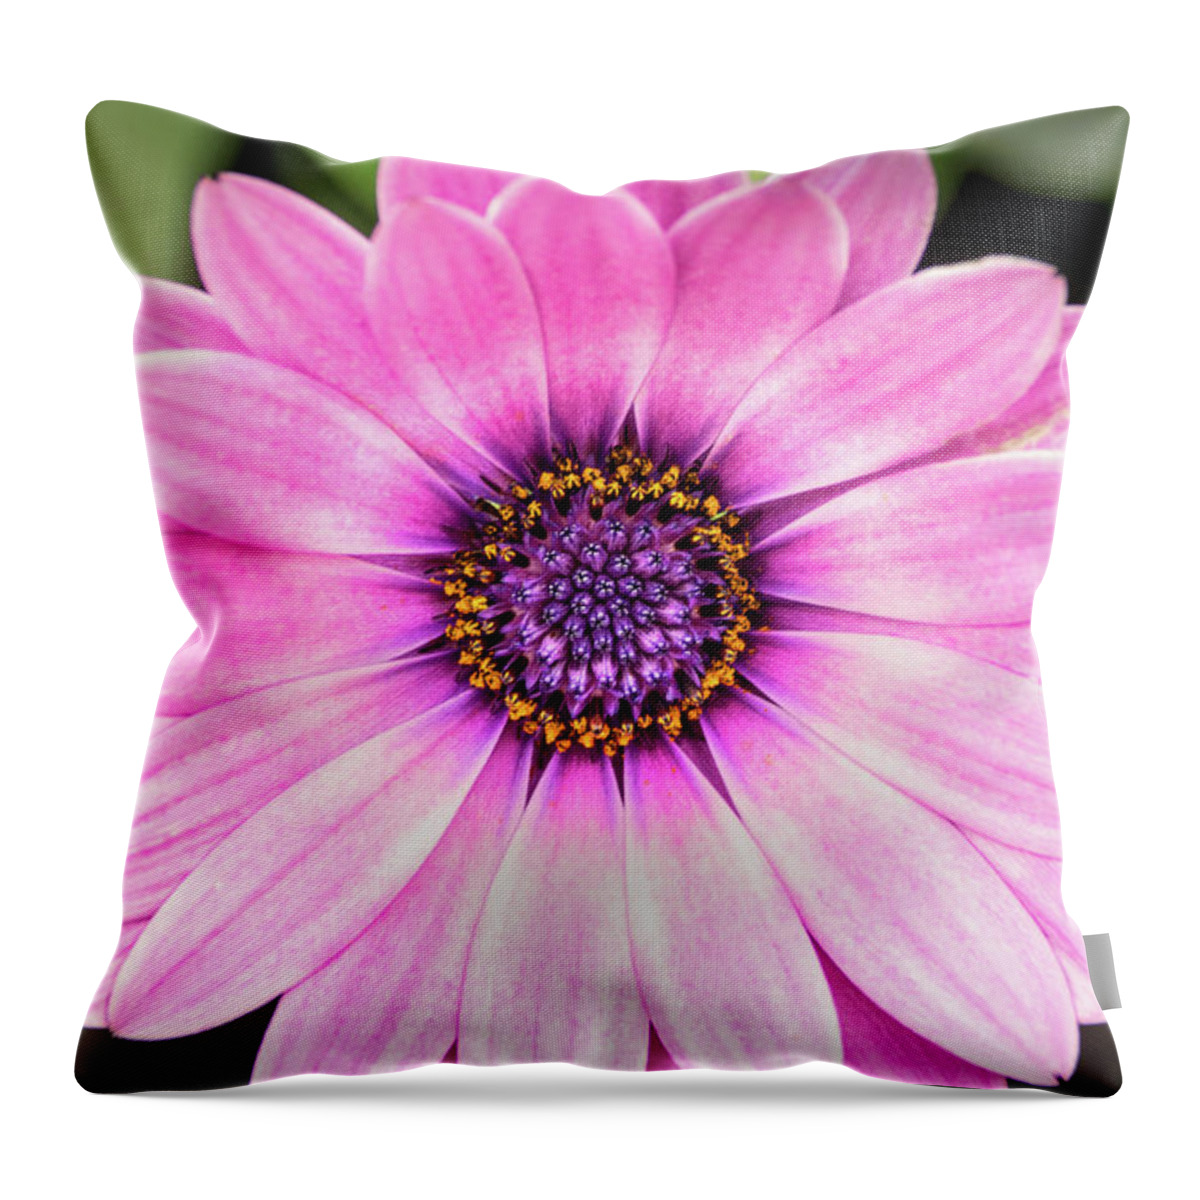 Flower Throw Pillow featuring the photograph Pale Purple Flower by Don Johnson